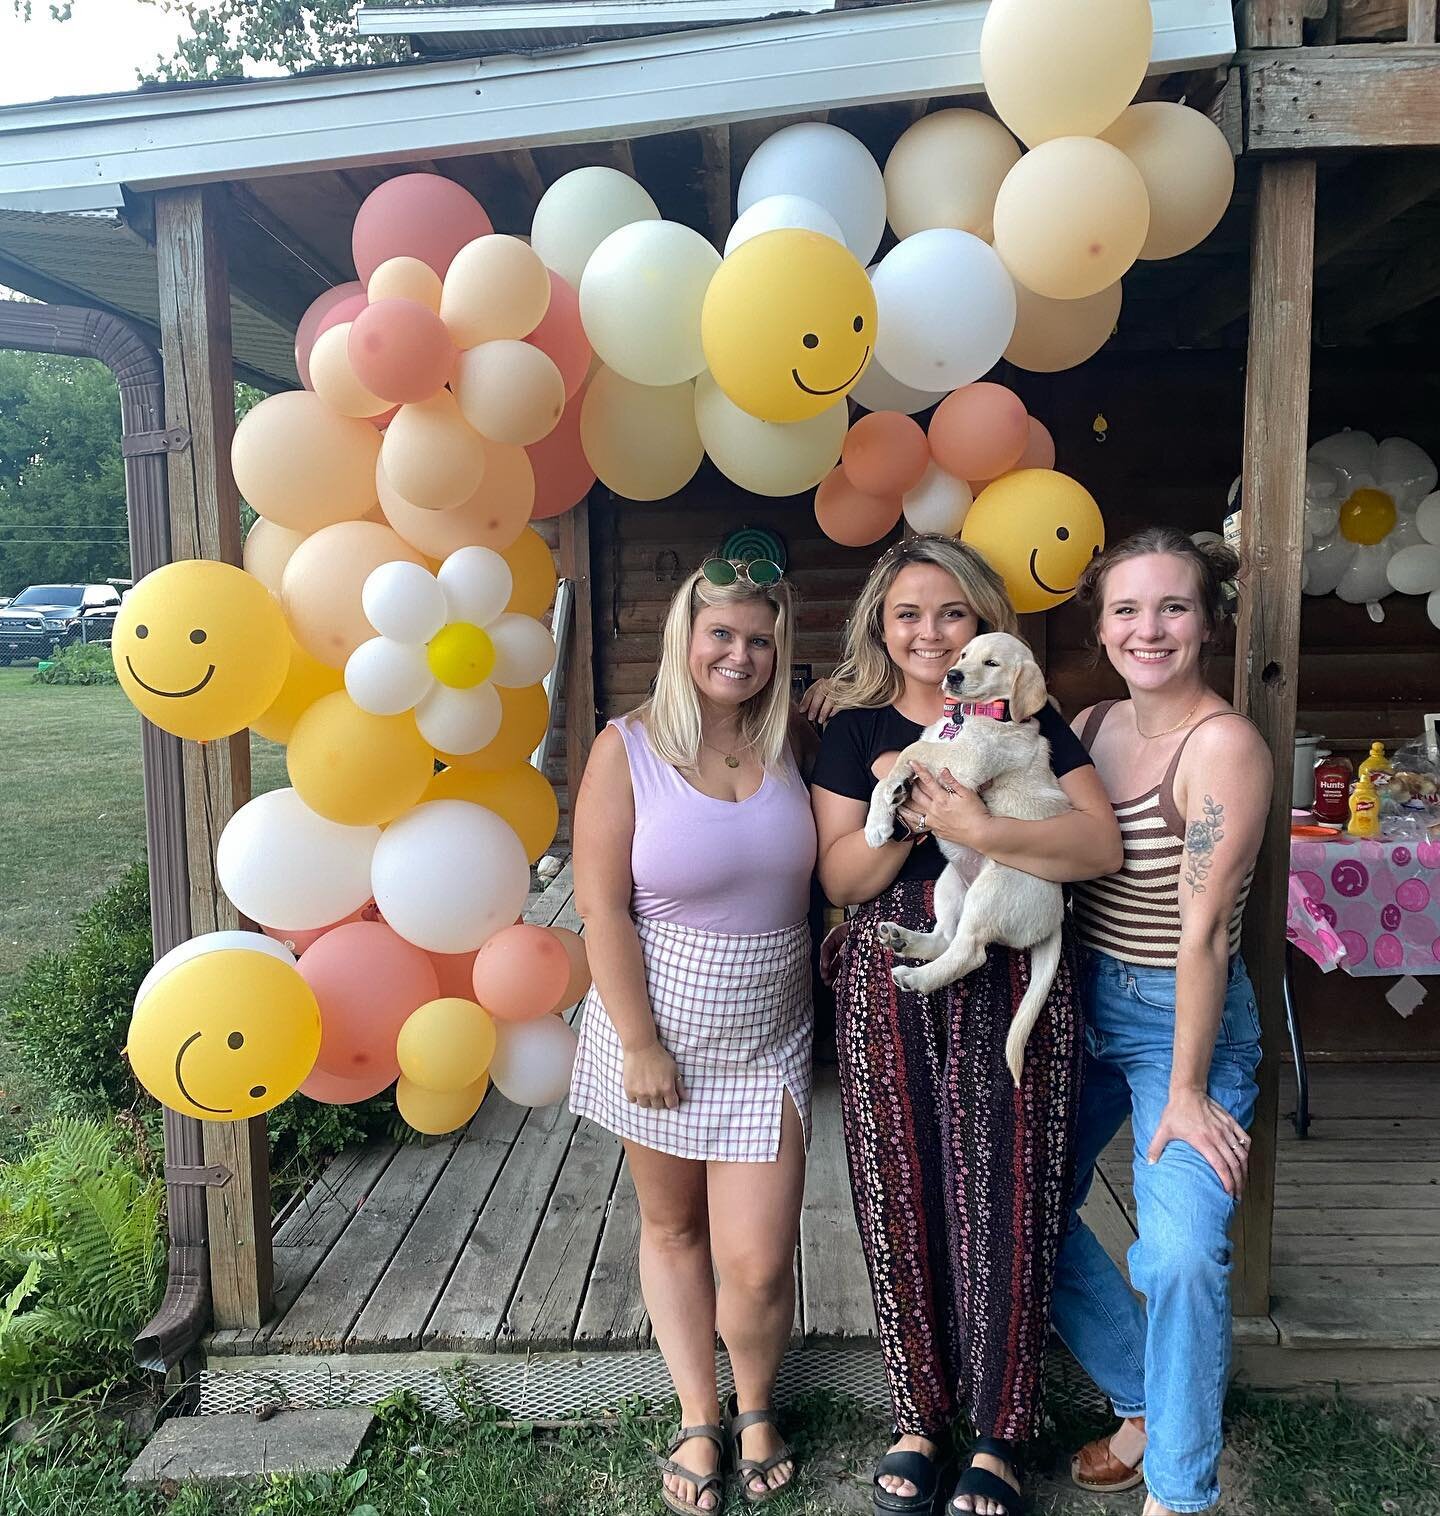 Had the grooviest festival party with my best friends to celebrate Brooklynn and how wonderful she is. It&rsquo;s so easy to celebrate you @brooklynnrethlake - you are a dream of a friend and I&rsquo;m so thankful every day for your authenticity and 